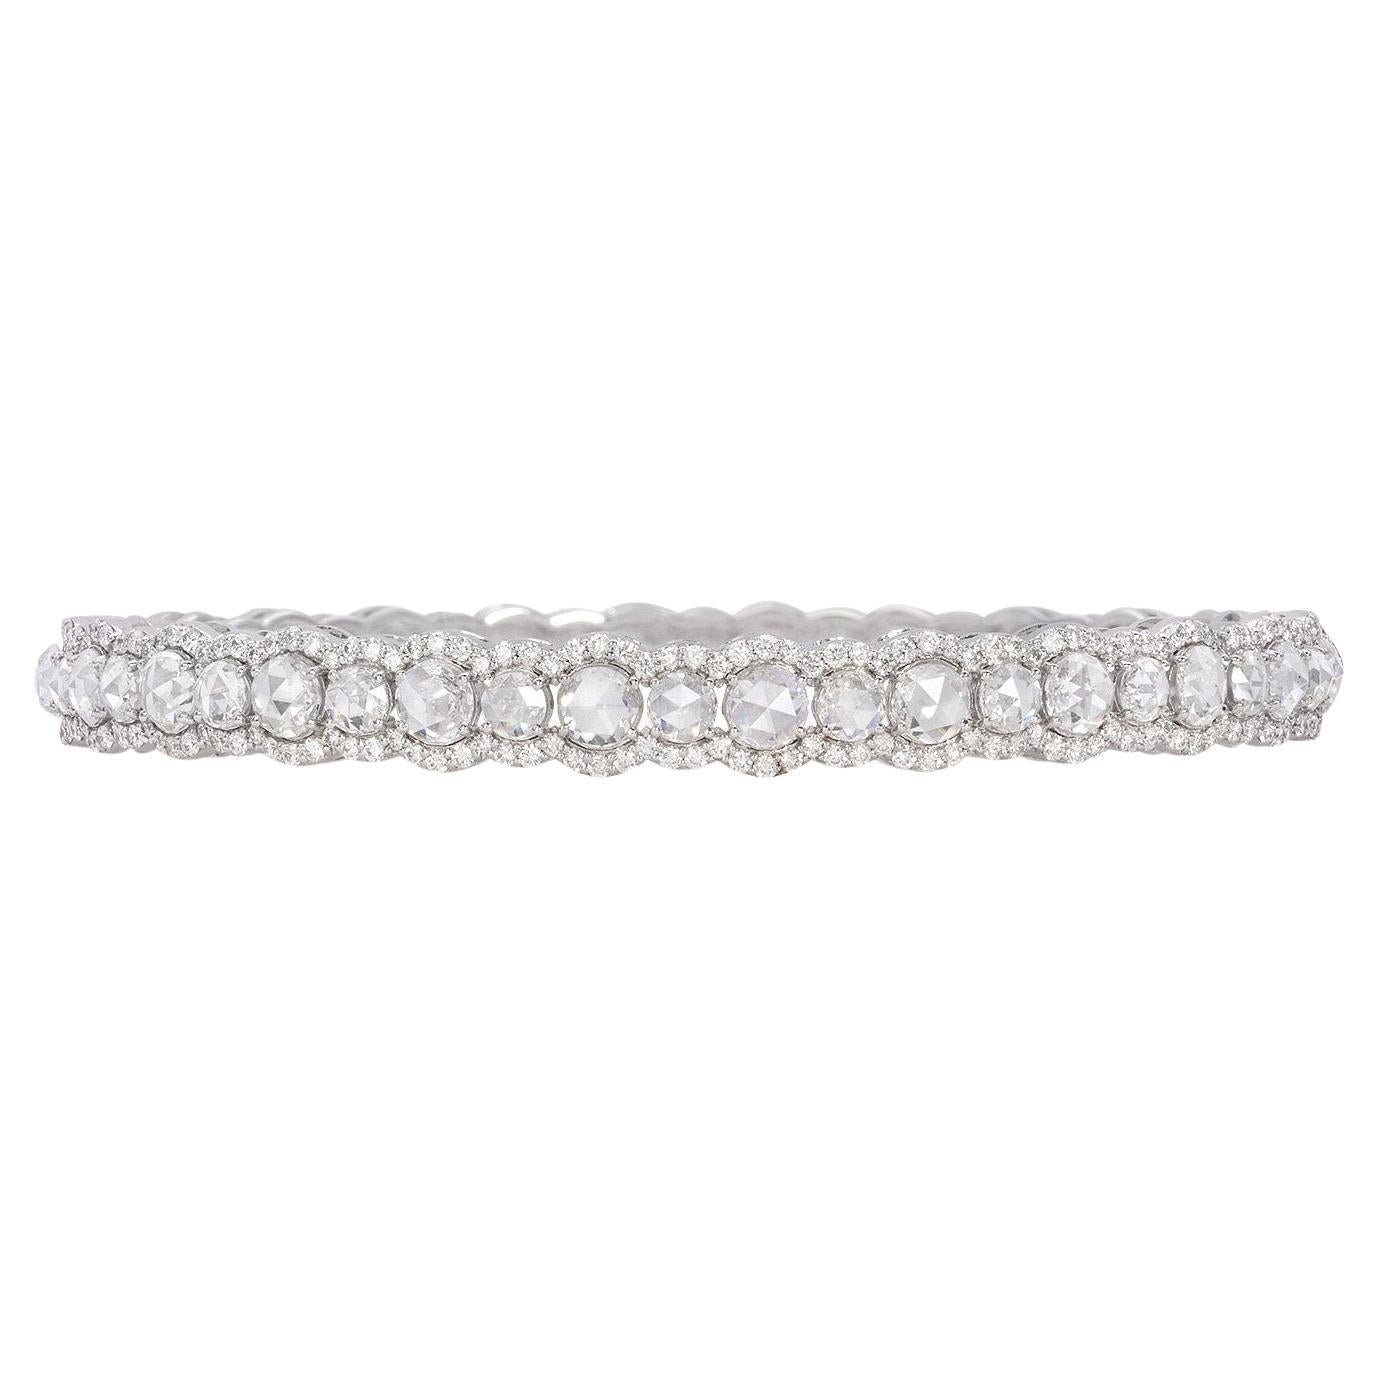 The tennis bracelet is a classic and timeless piece of jewelry that exudes elegance and sophistication. These 3 particular bracelets are crafted from 18k rose, white, and yellow gold, and will last you a lifetime.

Each bracelet is adorned with 2+